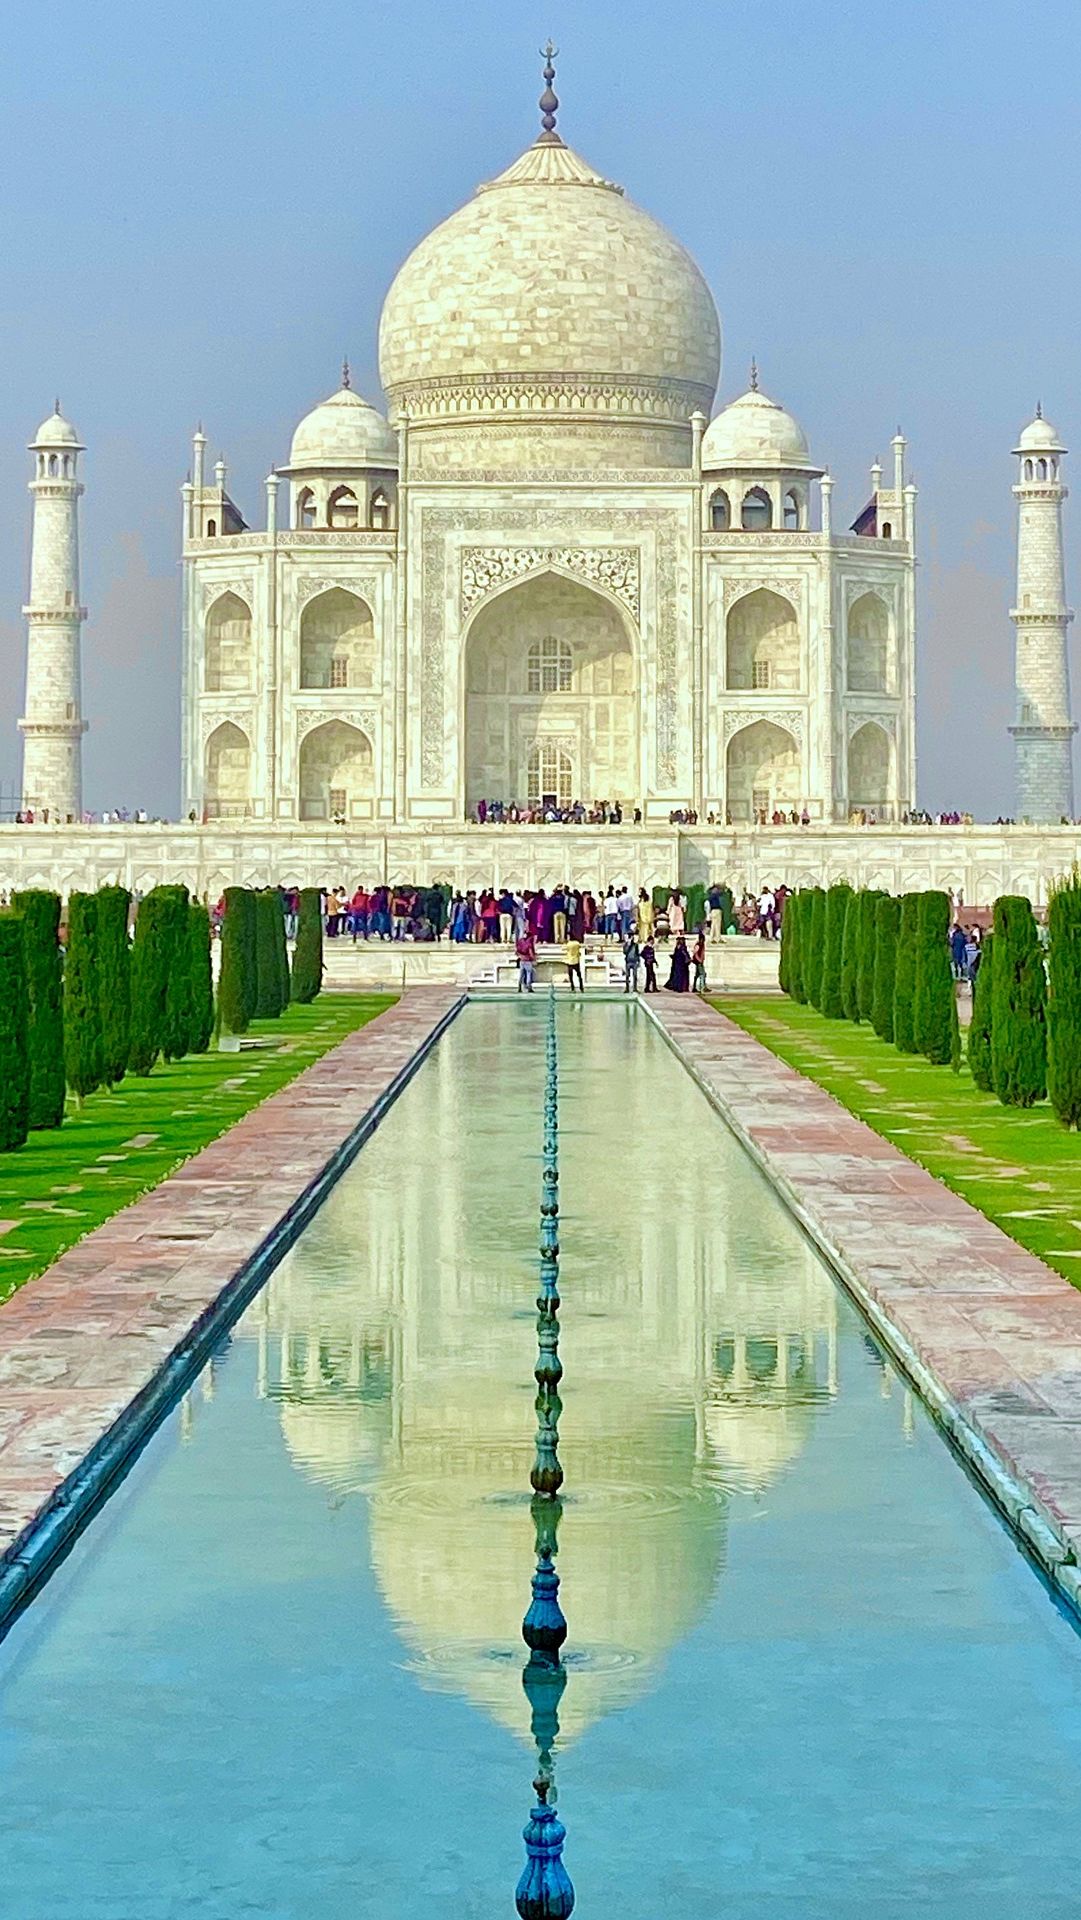 3. Taj Mahal: A Monument of Love, Not a Palace<br /><br
/>The iconic Taj Mahal is, in fact, a mausoleum. We often misunderstand it as a palace. Mughal Emperor Shah Jahan trusted this building in memory of his beloved wife, Mumtaz Mahal. This architectural masterpiece stands as proof of lasting love and devotion.<br
/><br
/>pixabay_Elmio1981